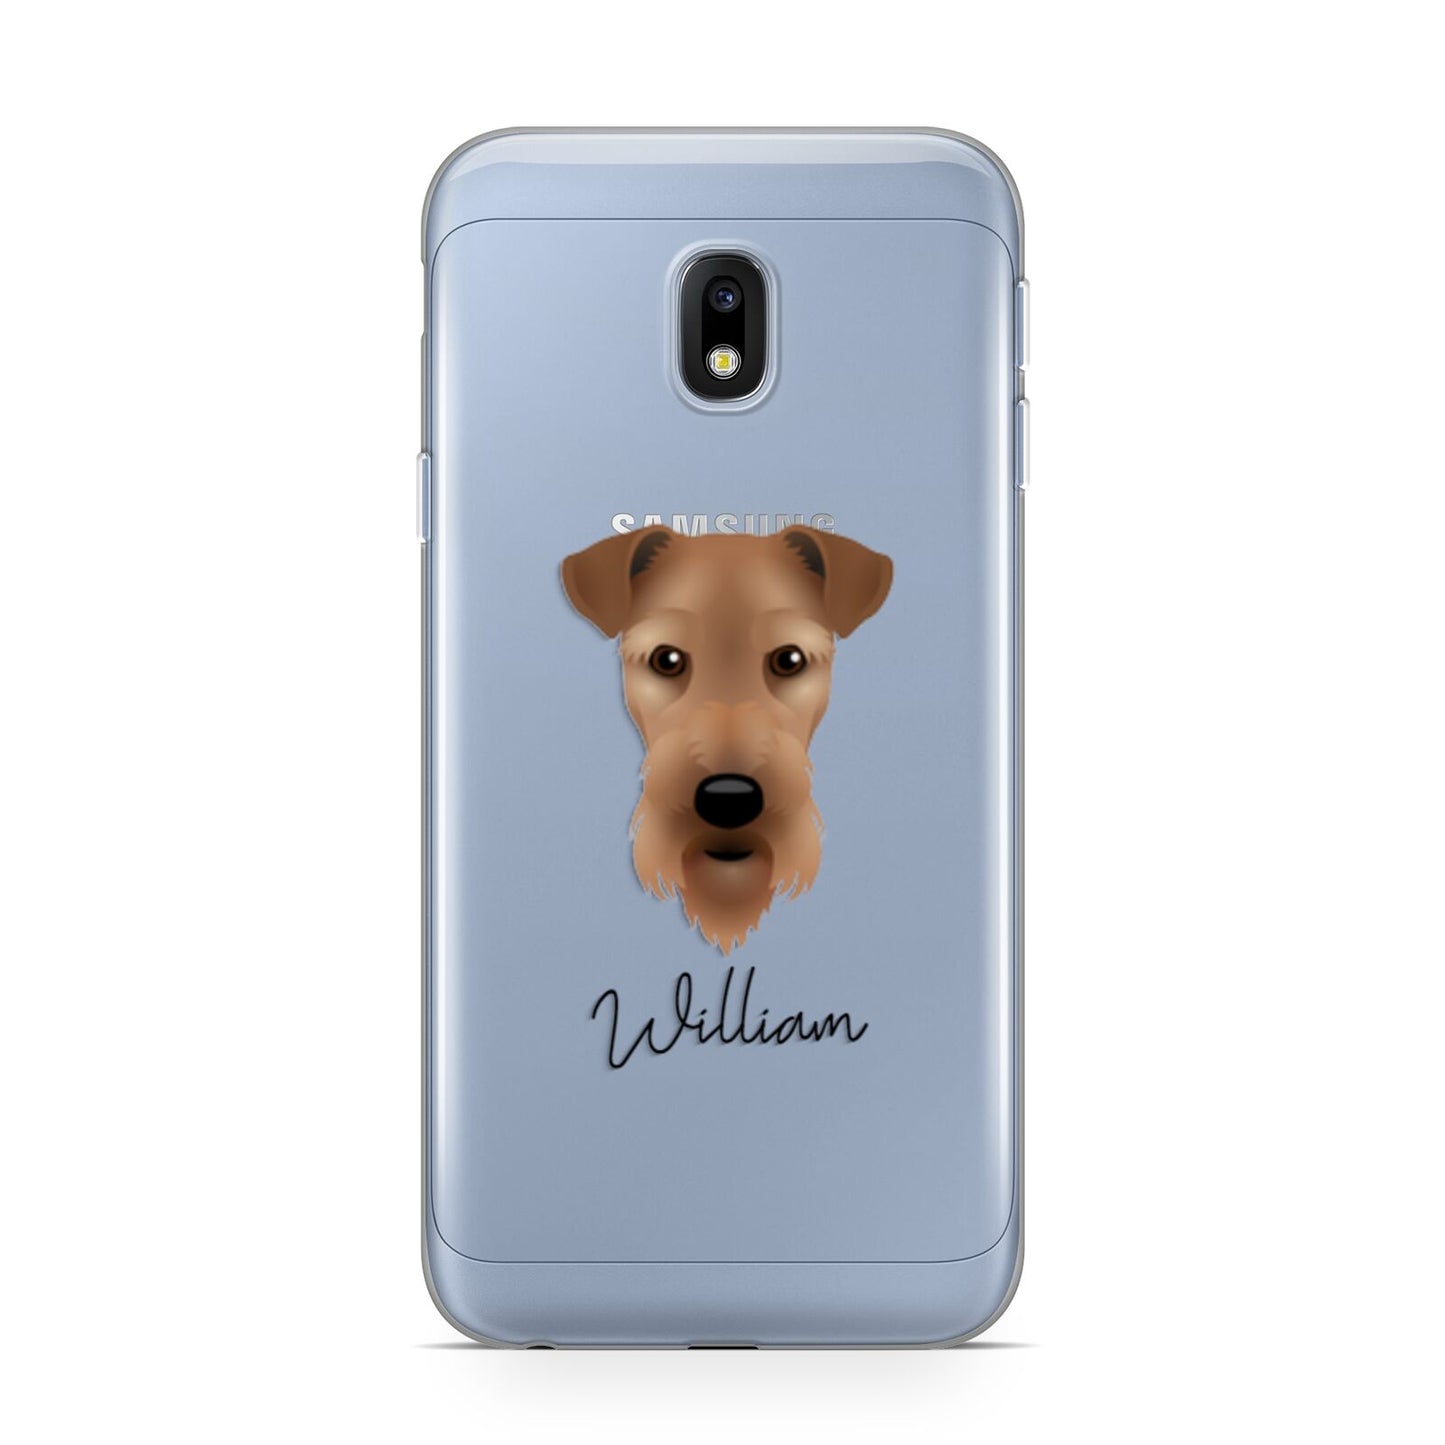 Airedale Terrier Personalised Samsung Galaxy J3 2017 Case